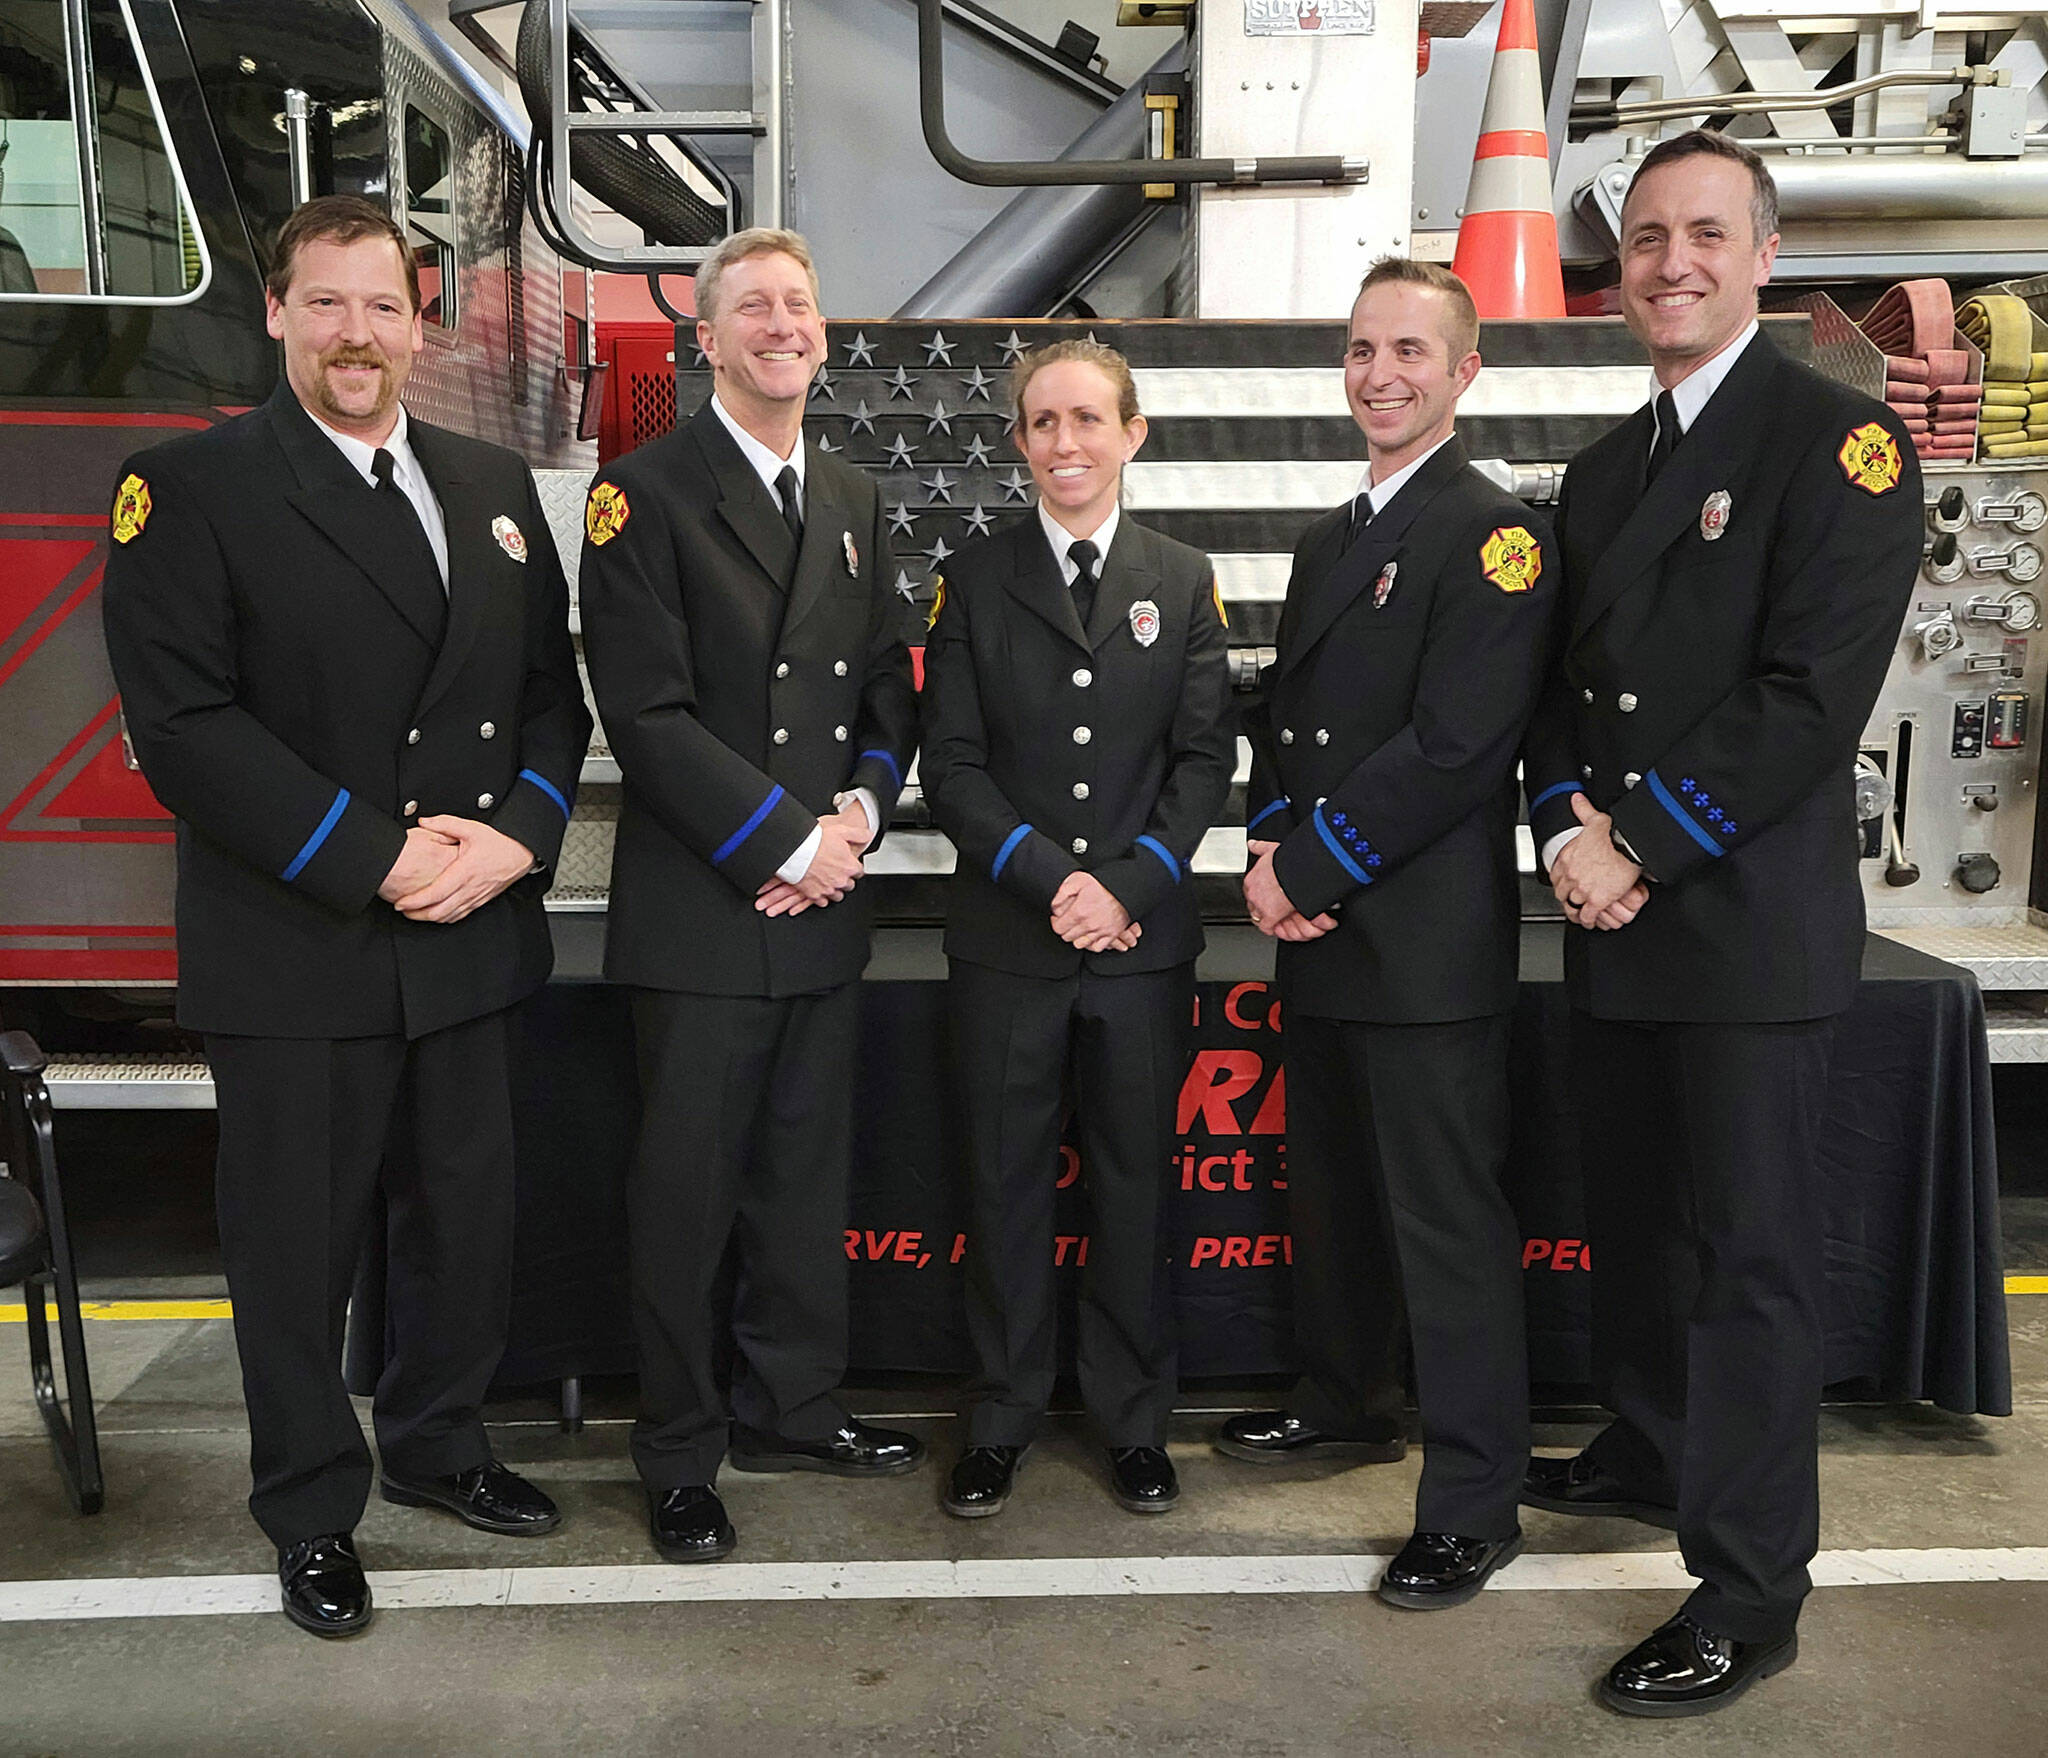 Photo courtesy Clallam County Fire District 3/ Five new Clallam County Fire District 3 firefighters/paramedics were sworn in on March 20, including, from left, Mark Karjalainen, Erik Payne, Eliza Winne, Jeremy Church and Bryant Kroh.